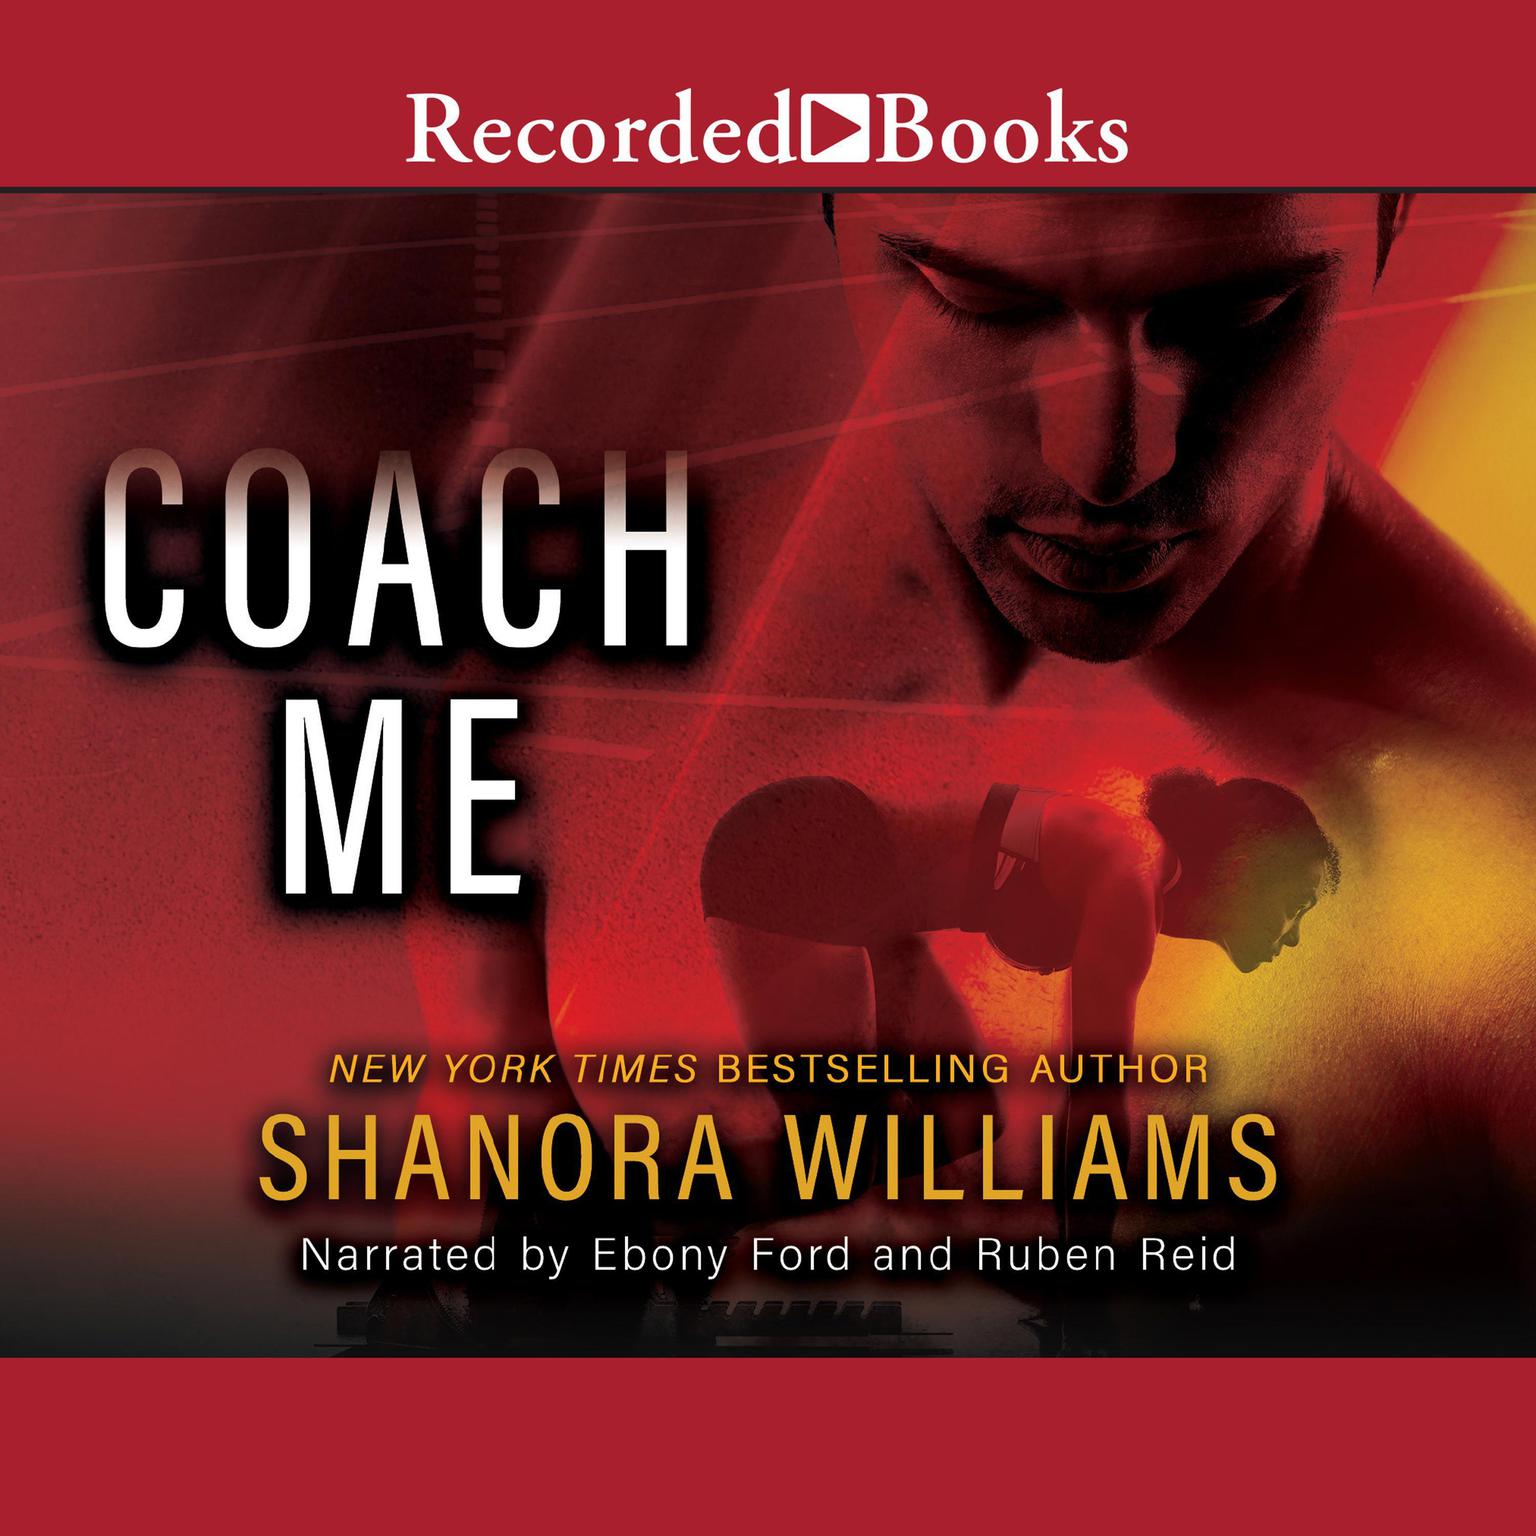 Coach Me Audiobook, by Shanora Williams